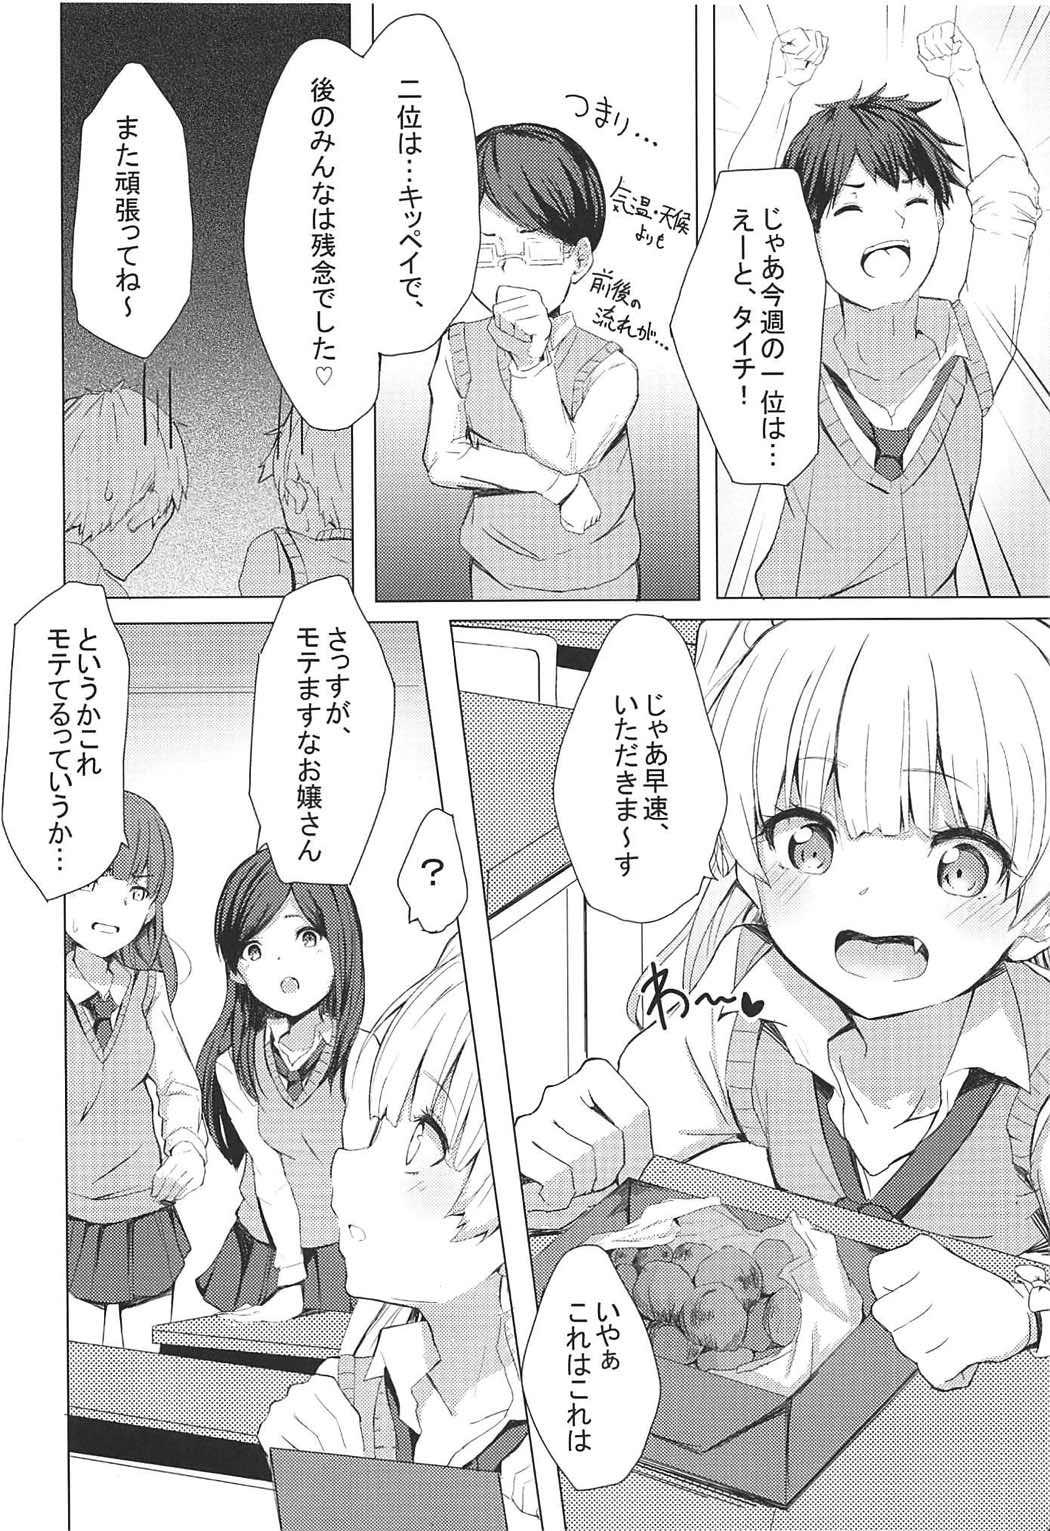 Spandex Danshi to Asobo☆ - The idolmaster Home - Page 3